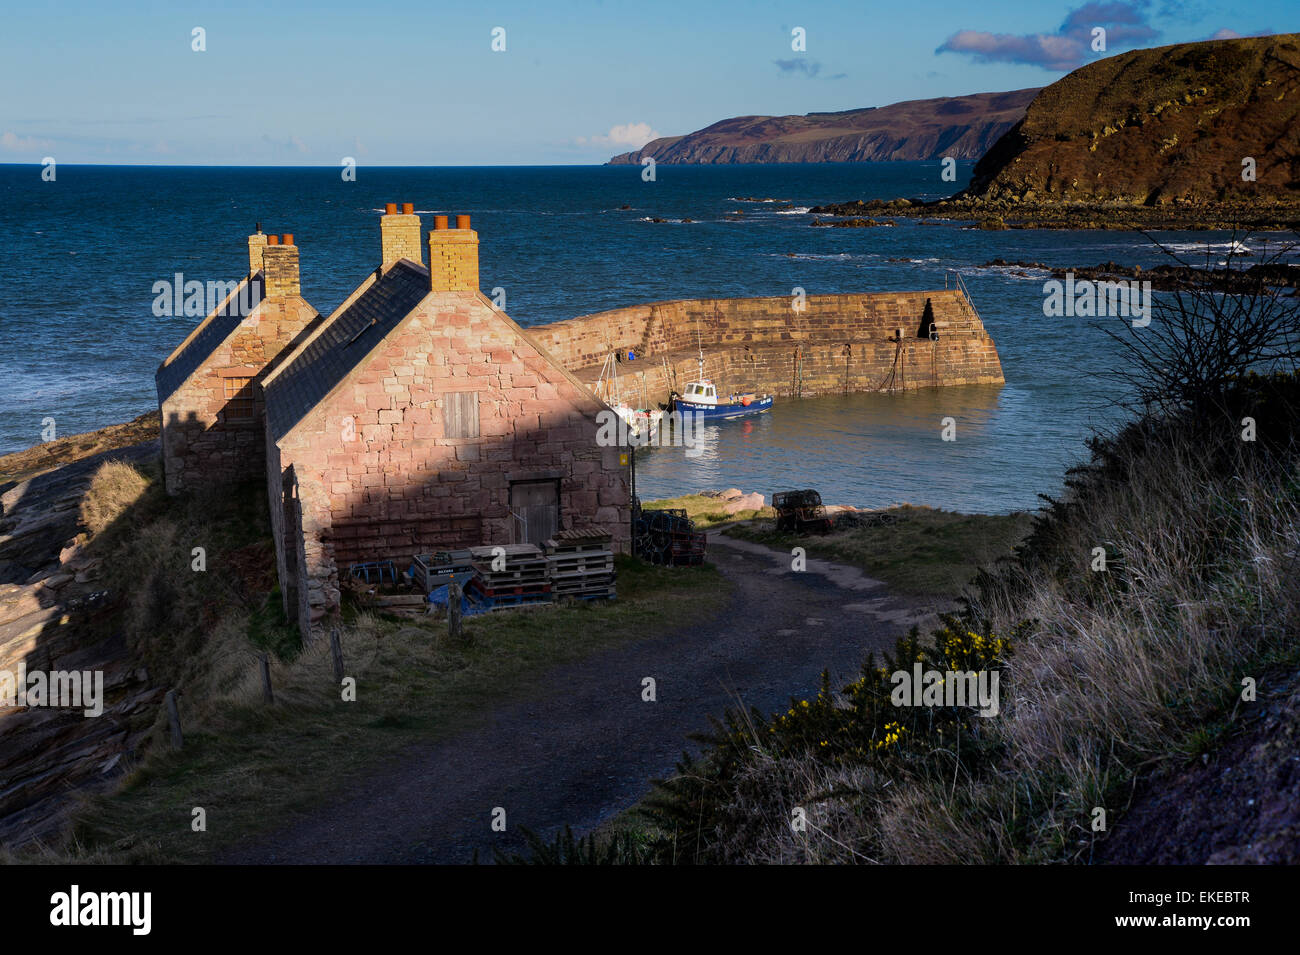 The small Scottish fishing harbour at Cove on the east coast of Scotland near Dunbar. Stock Photo